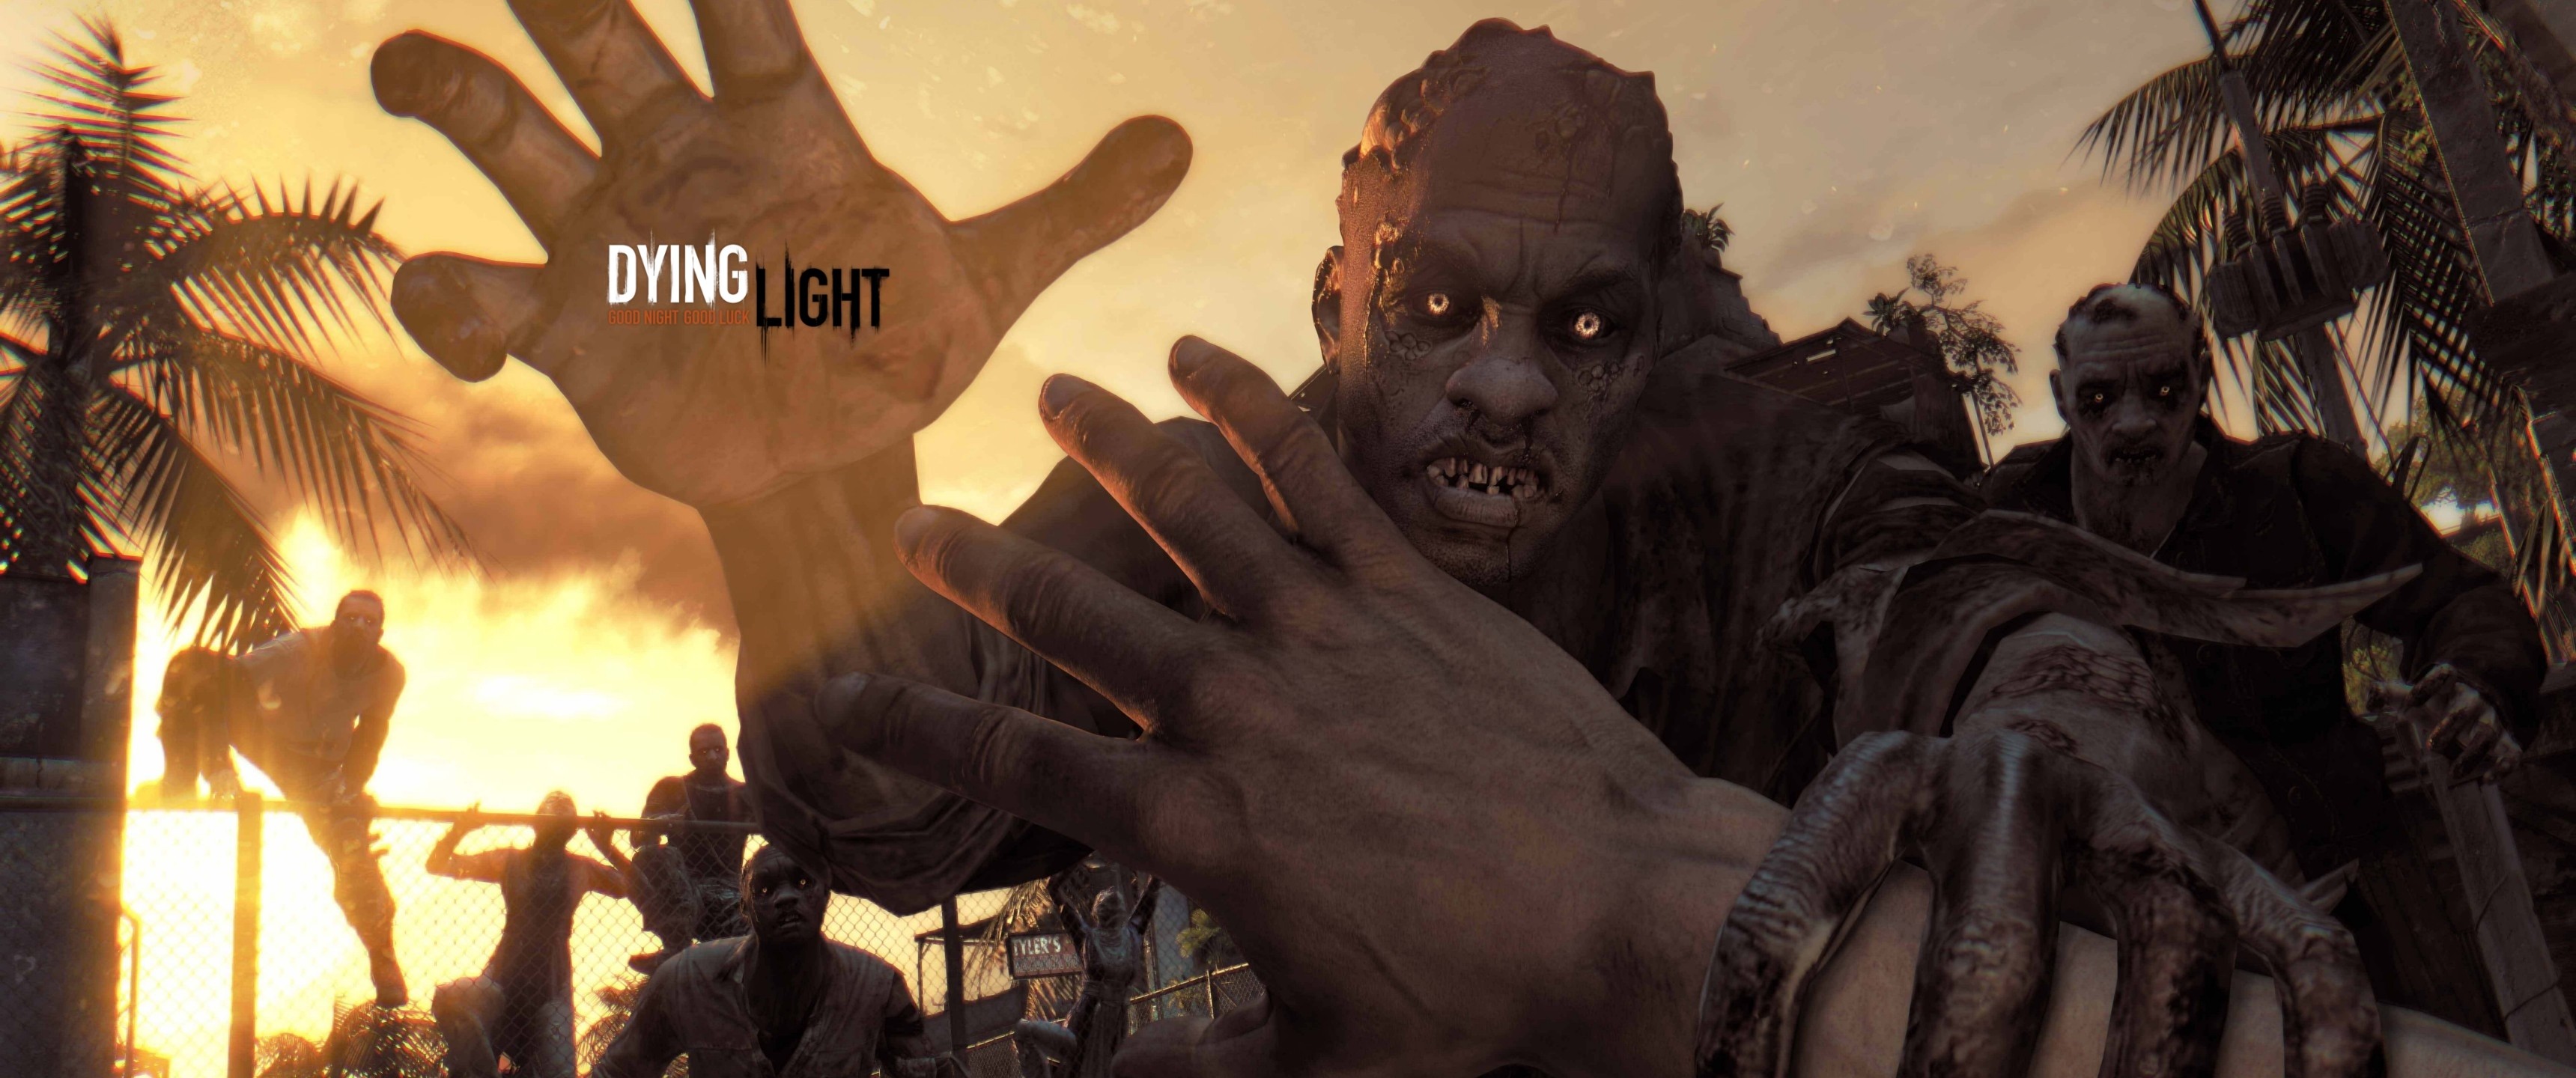 General 3440x1440 video games Dying Light zombies Techland undead Video Game Horror